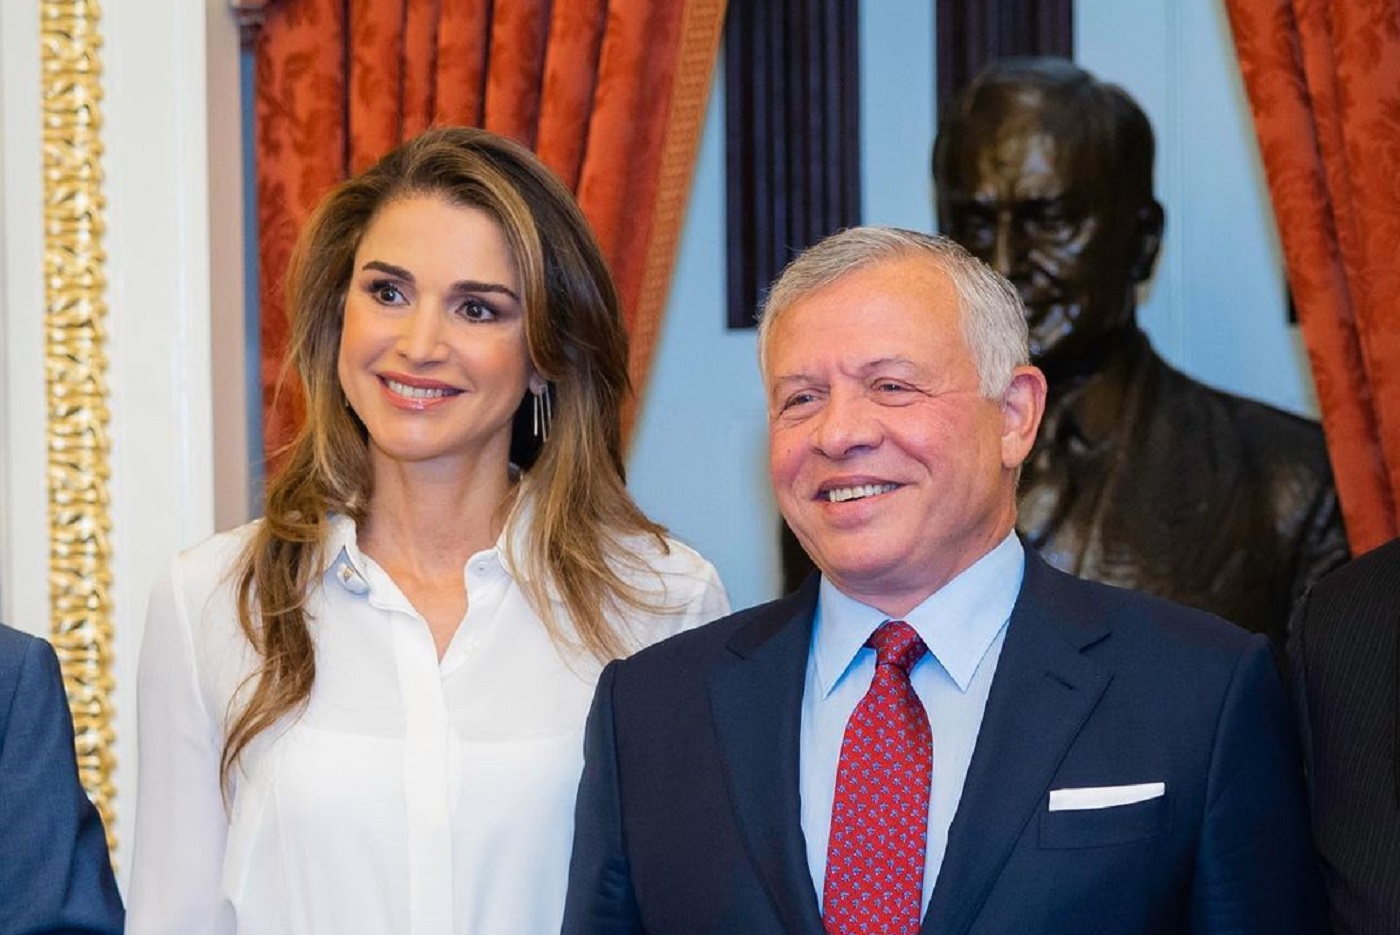 Queen Rania of Jordan with King Abdullah II and Crown Prince Hussein paid an official visit to Washington. Rania chose a stunning outfit for the second engagement in the USA